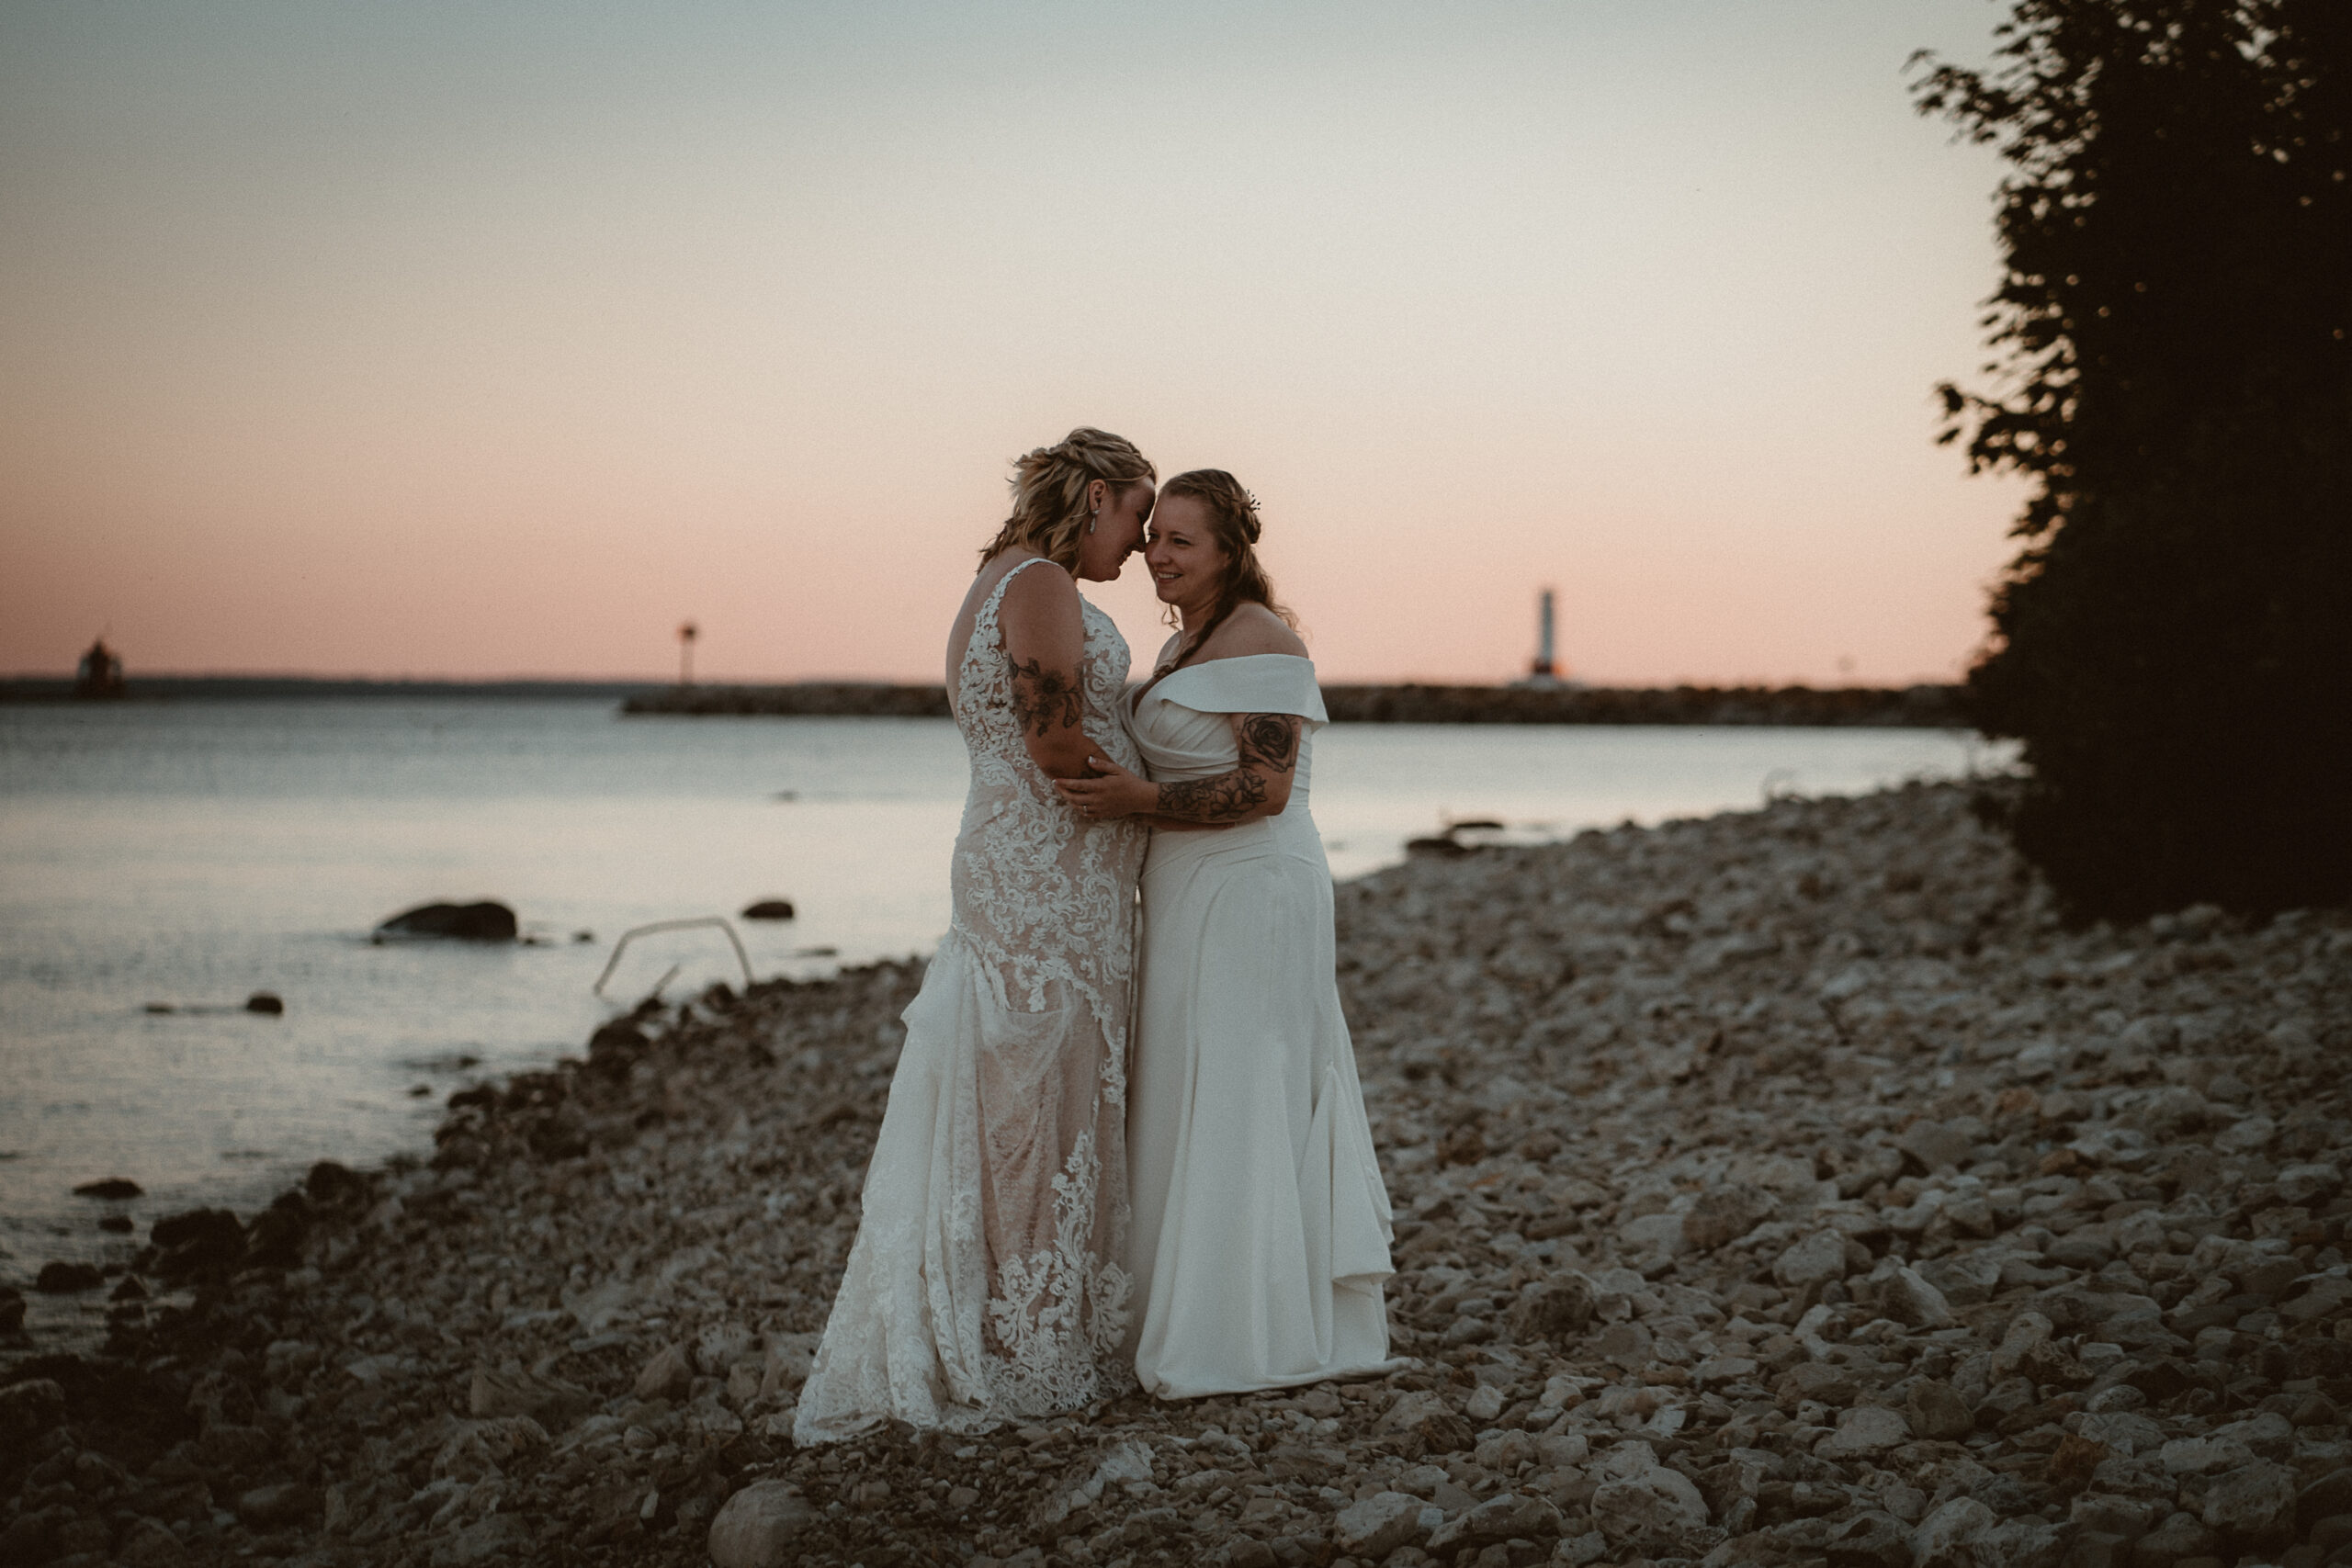 Brides holding one another at sunset on the rocky beach of lake Huron.